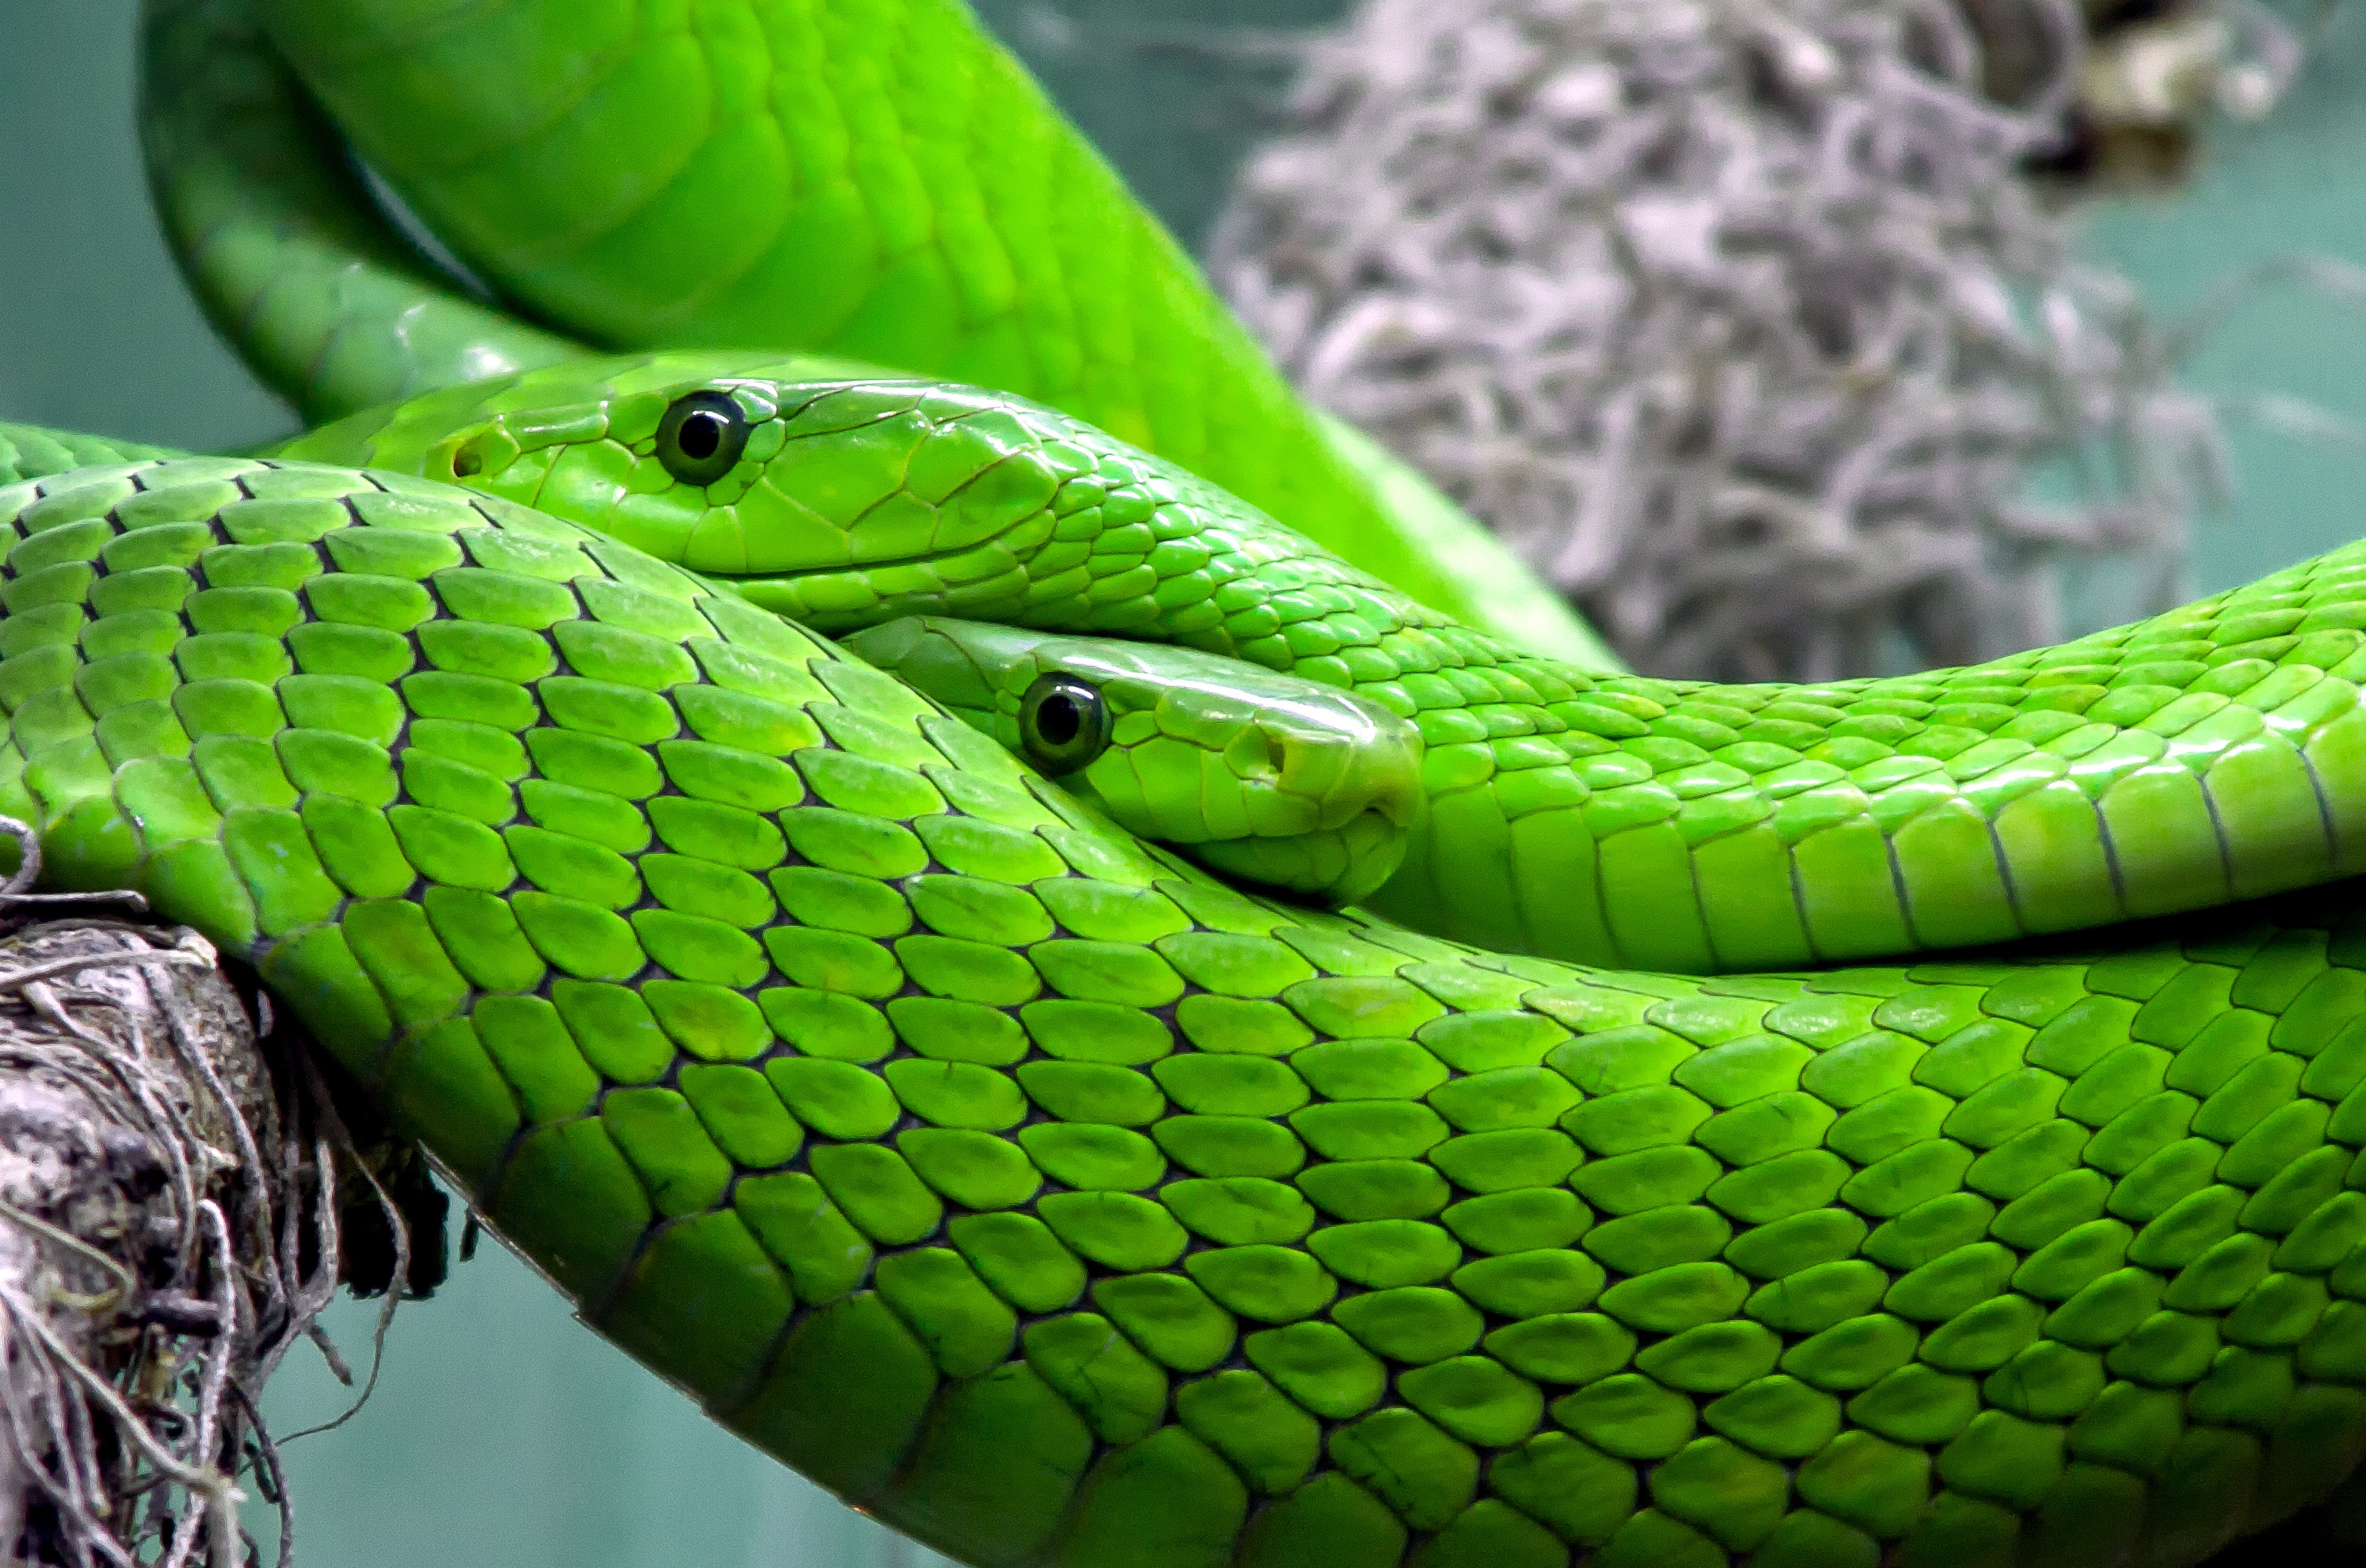 Free photo Green poisonous snakes on a tree branch